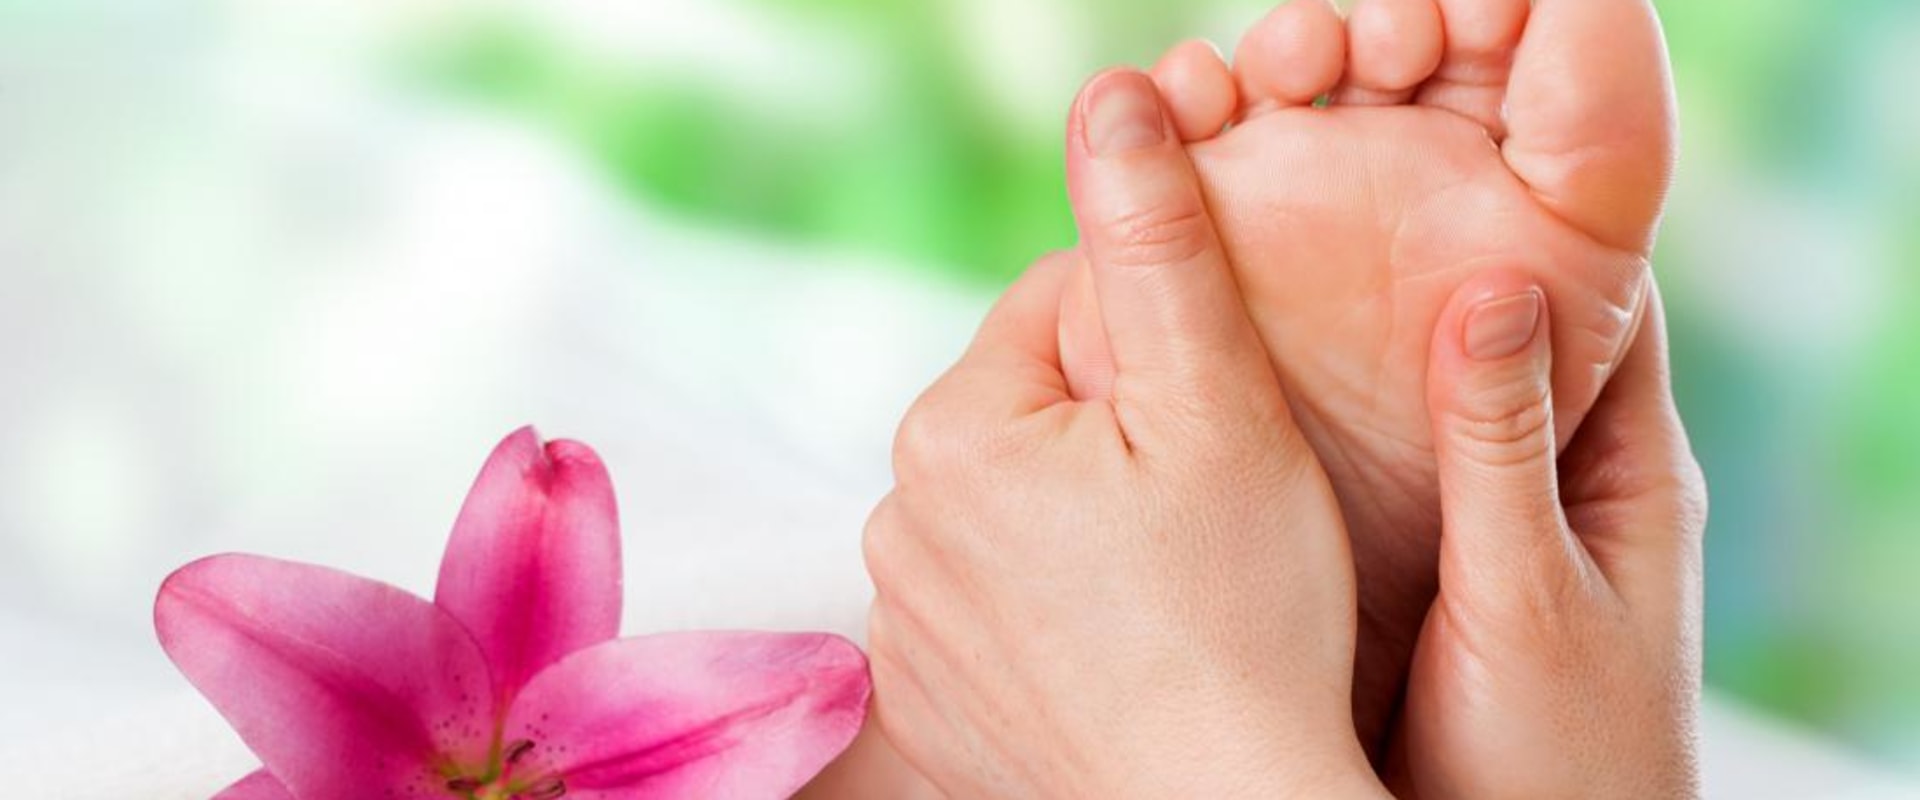 Reflexology Massage Therapy for Relaxation